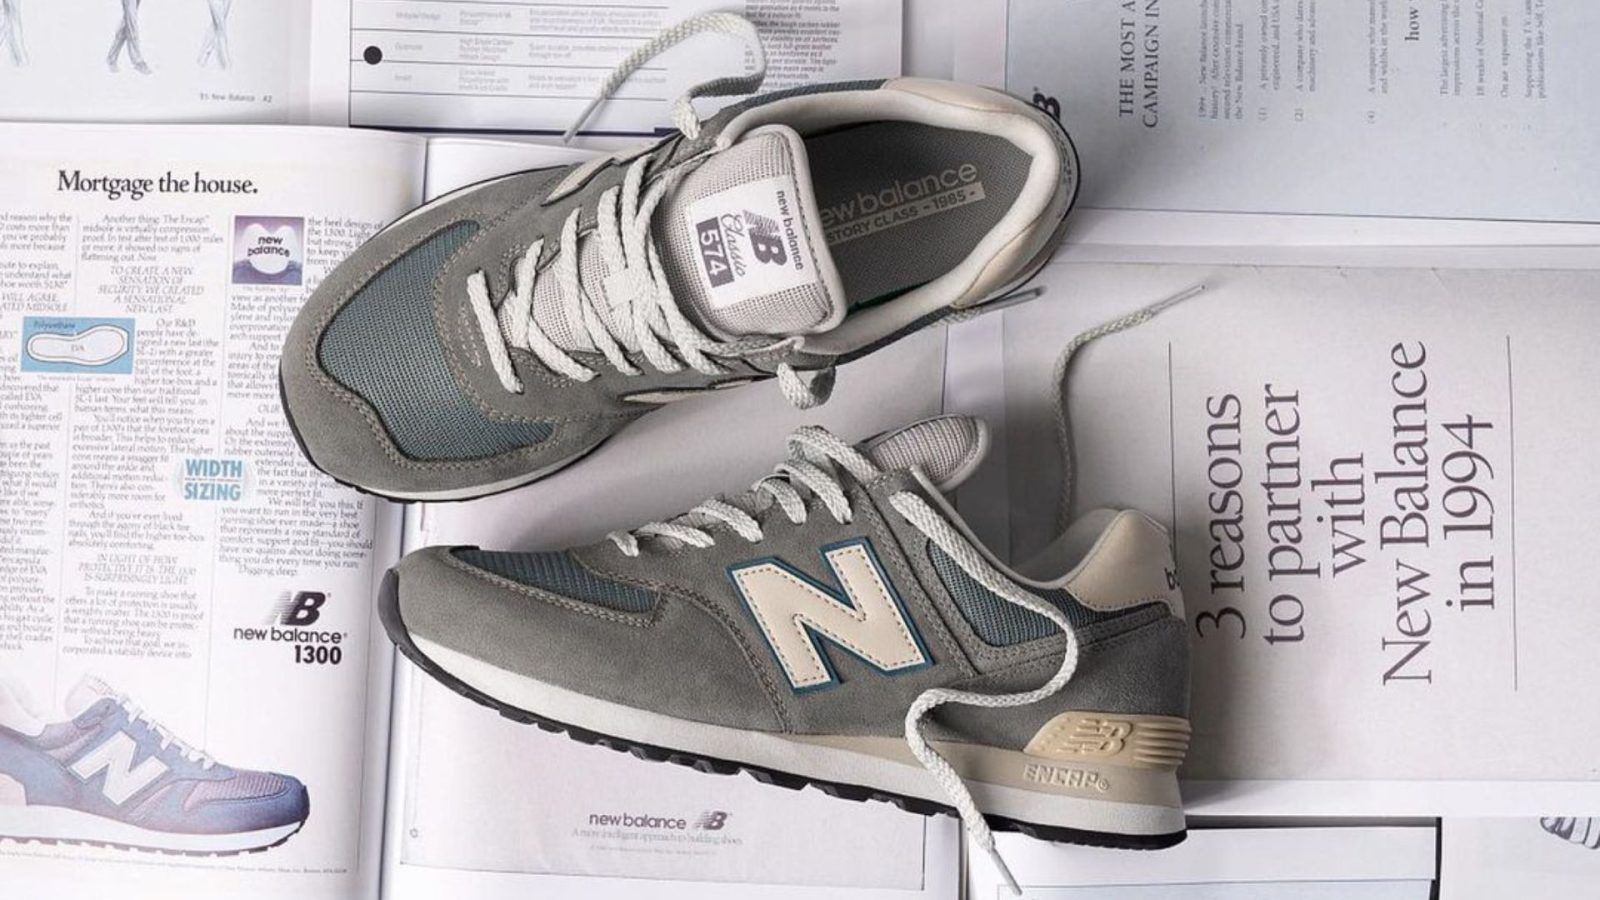 New Balance are worthy to be added to your collection